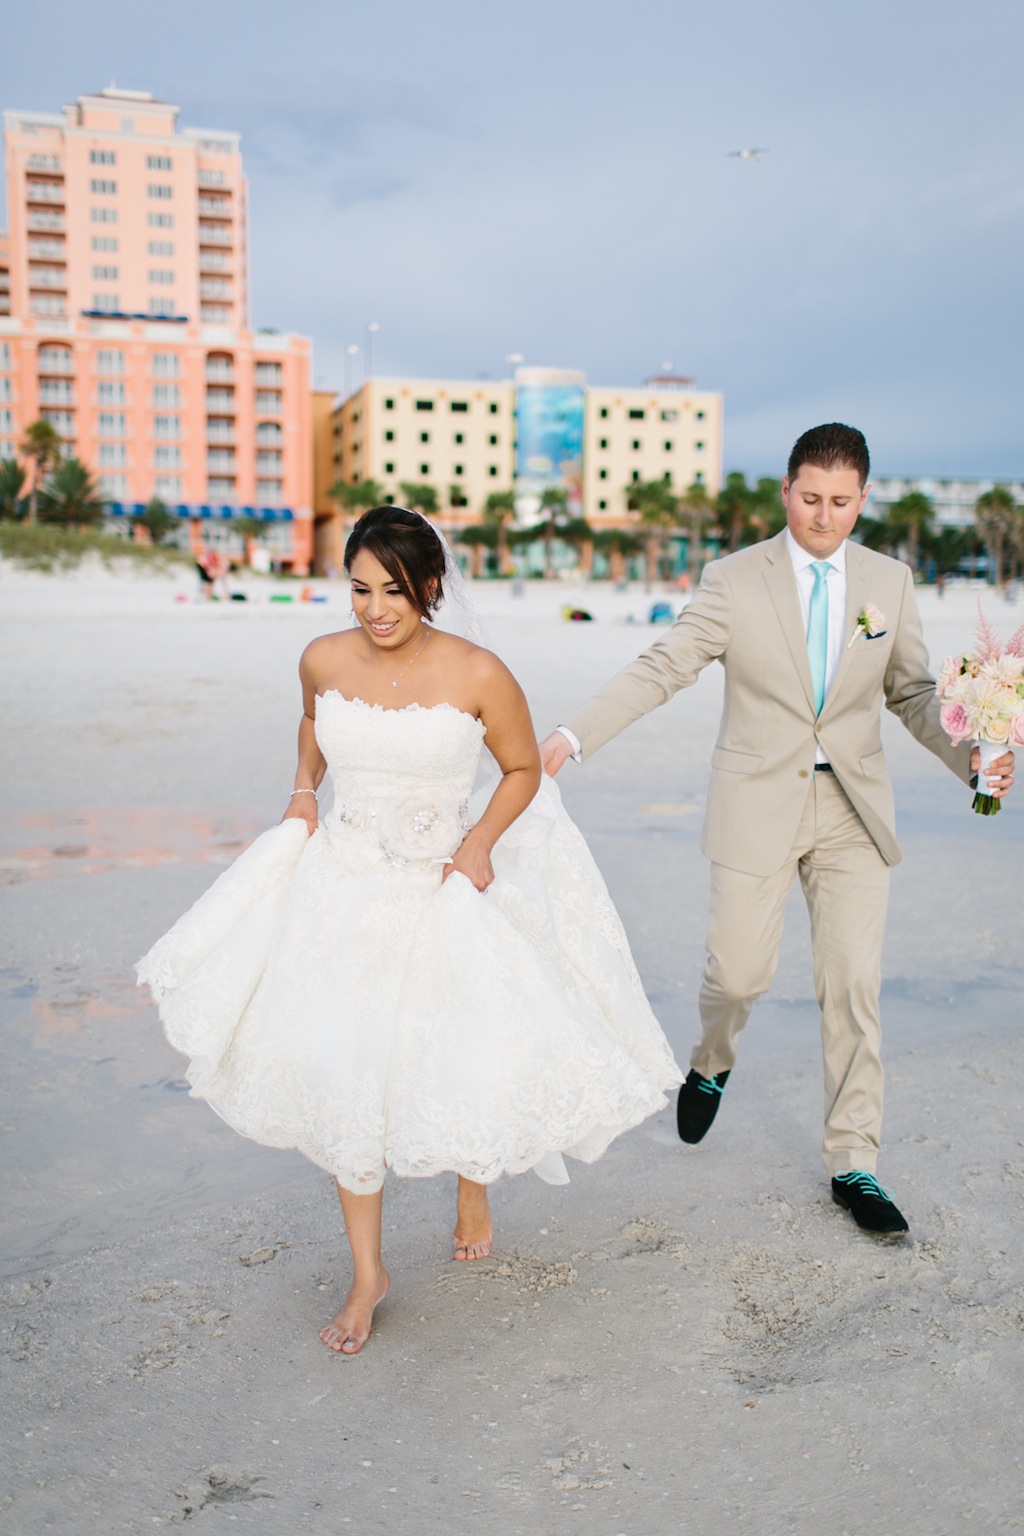 Clearwater Beach Bride and Groom on Wedding Day - Sophan Theam Photography